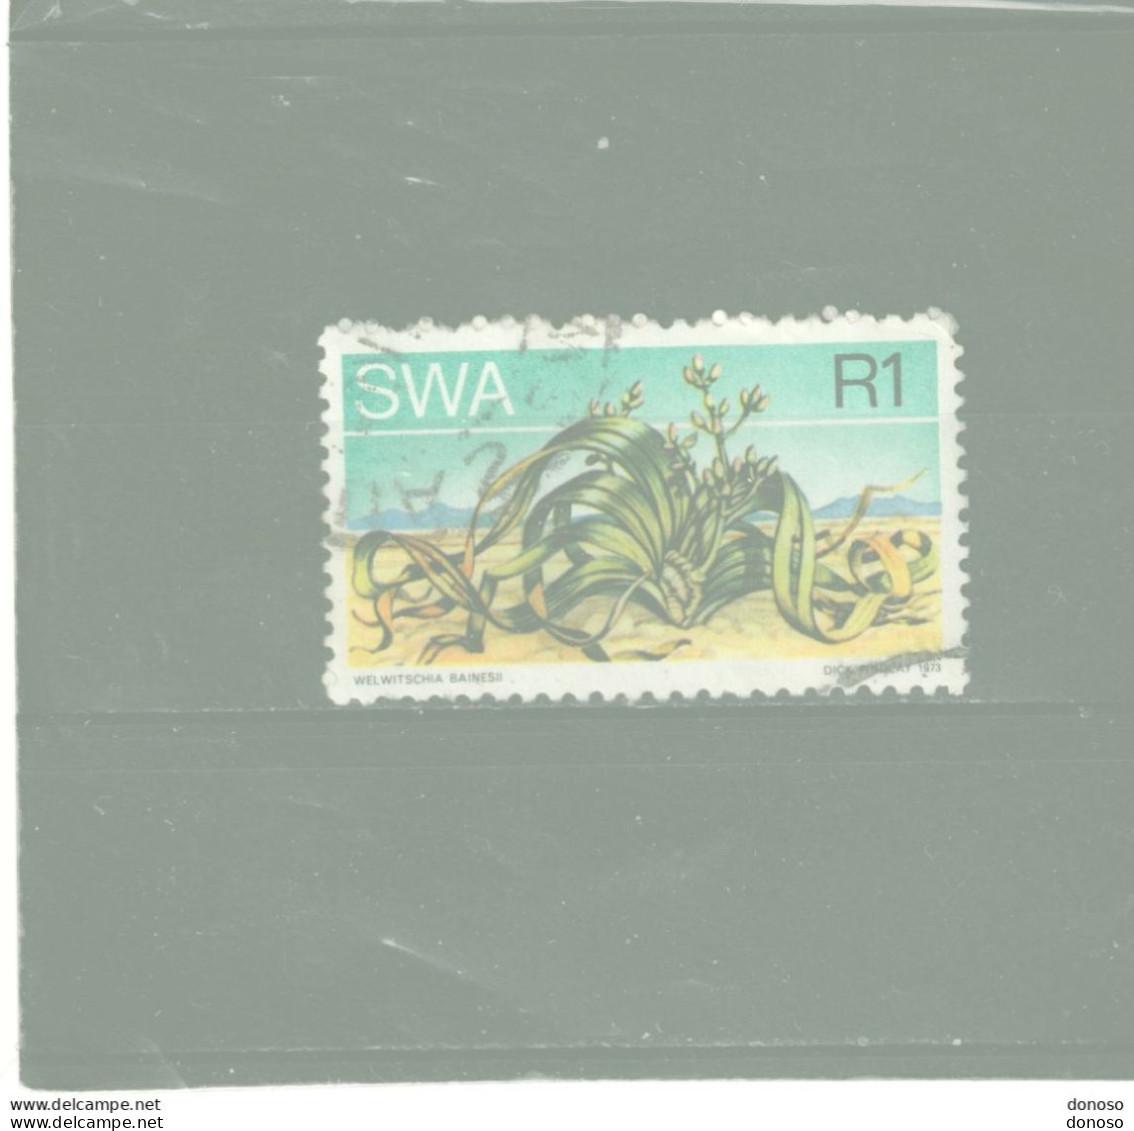 SWA SUD OUEST AFRICAIN 1973 Welwischia Yvert 331 Oblitéré Cote Yv 6,50 Euros - Zuidwest-Afrika (1923-1990)